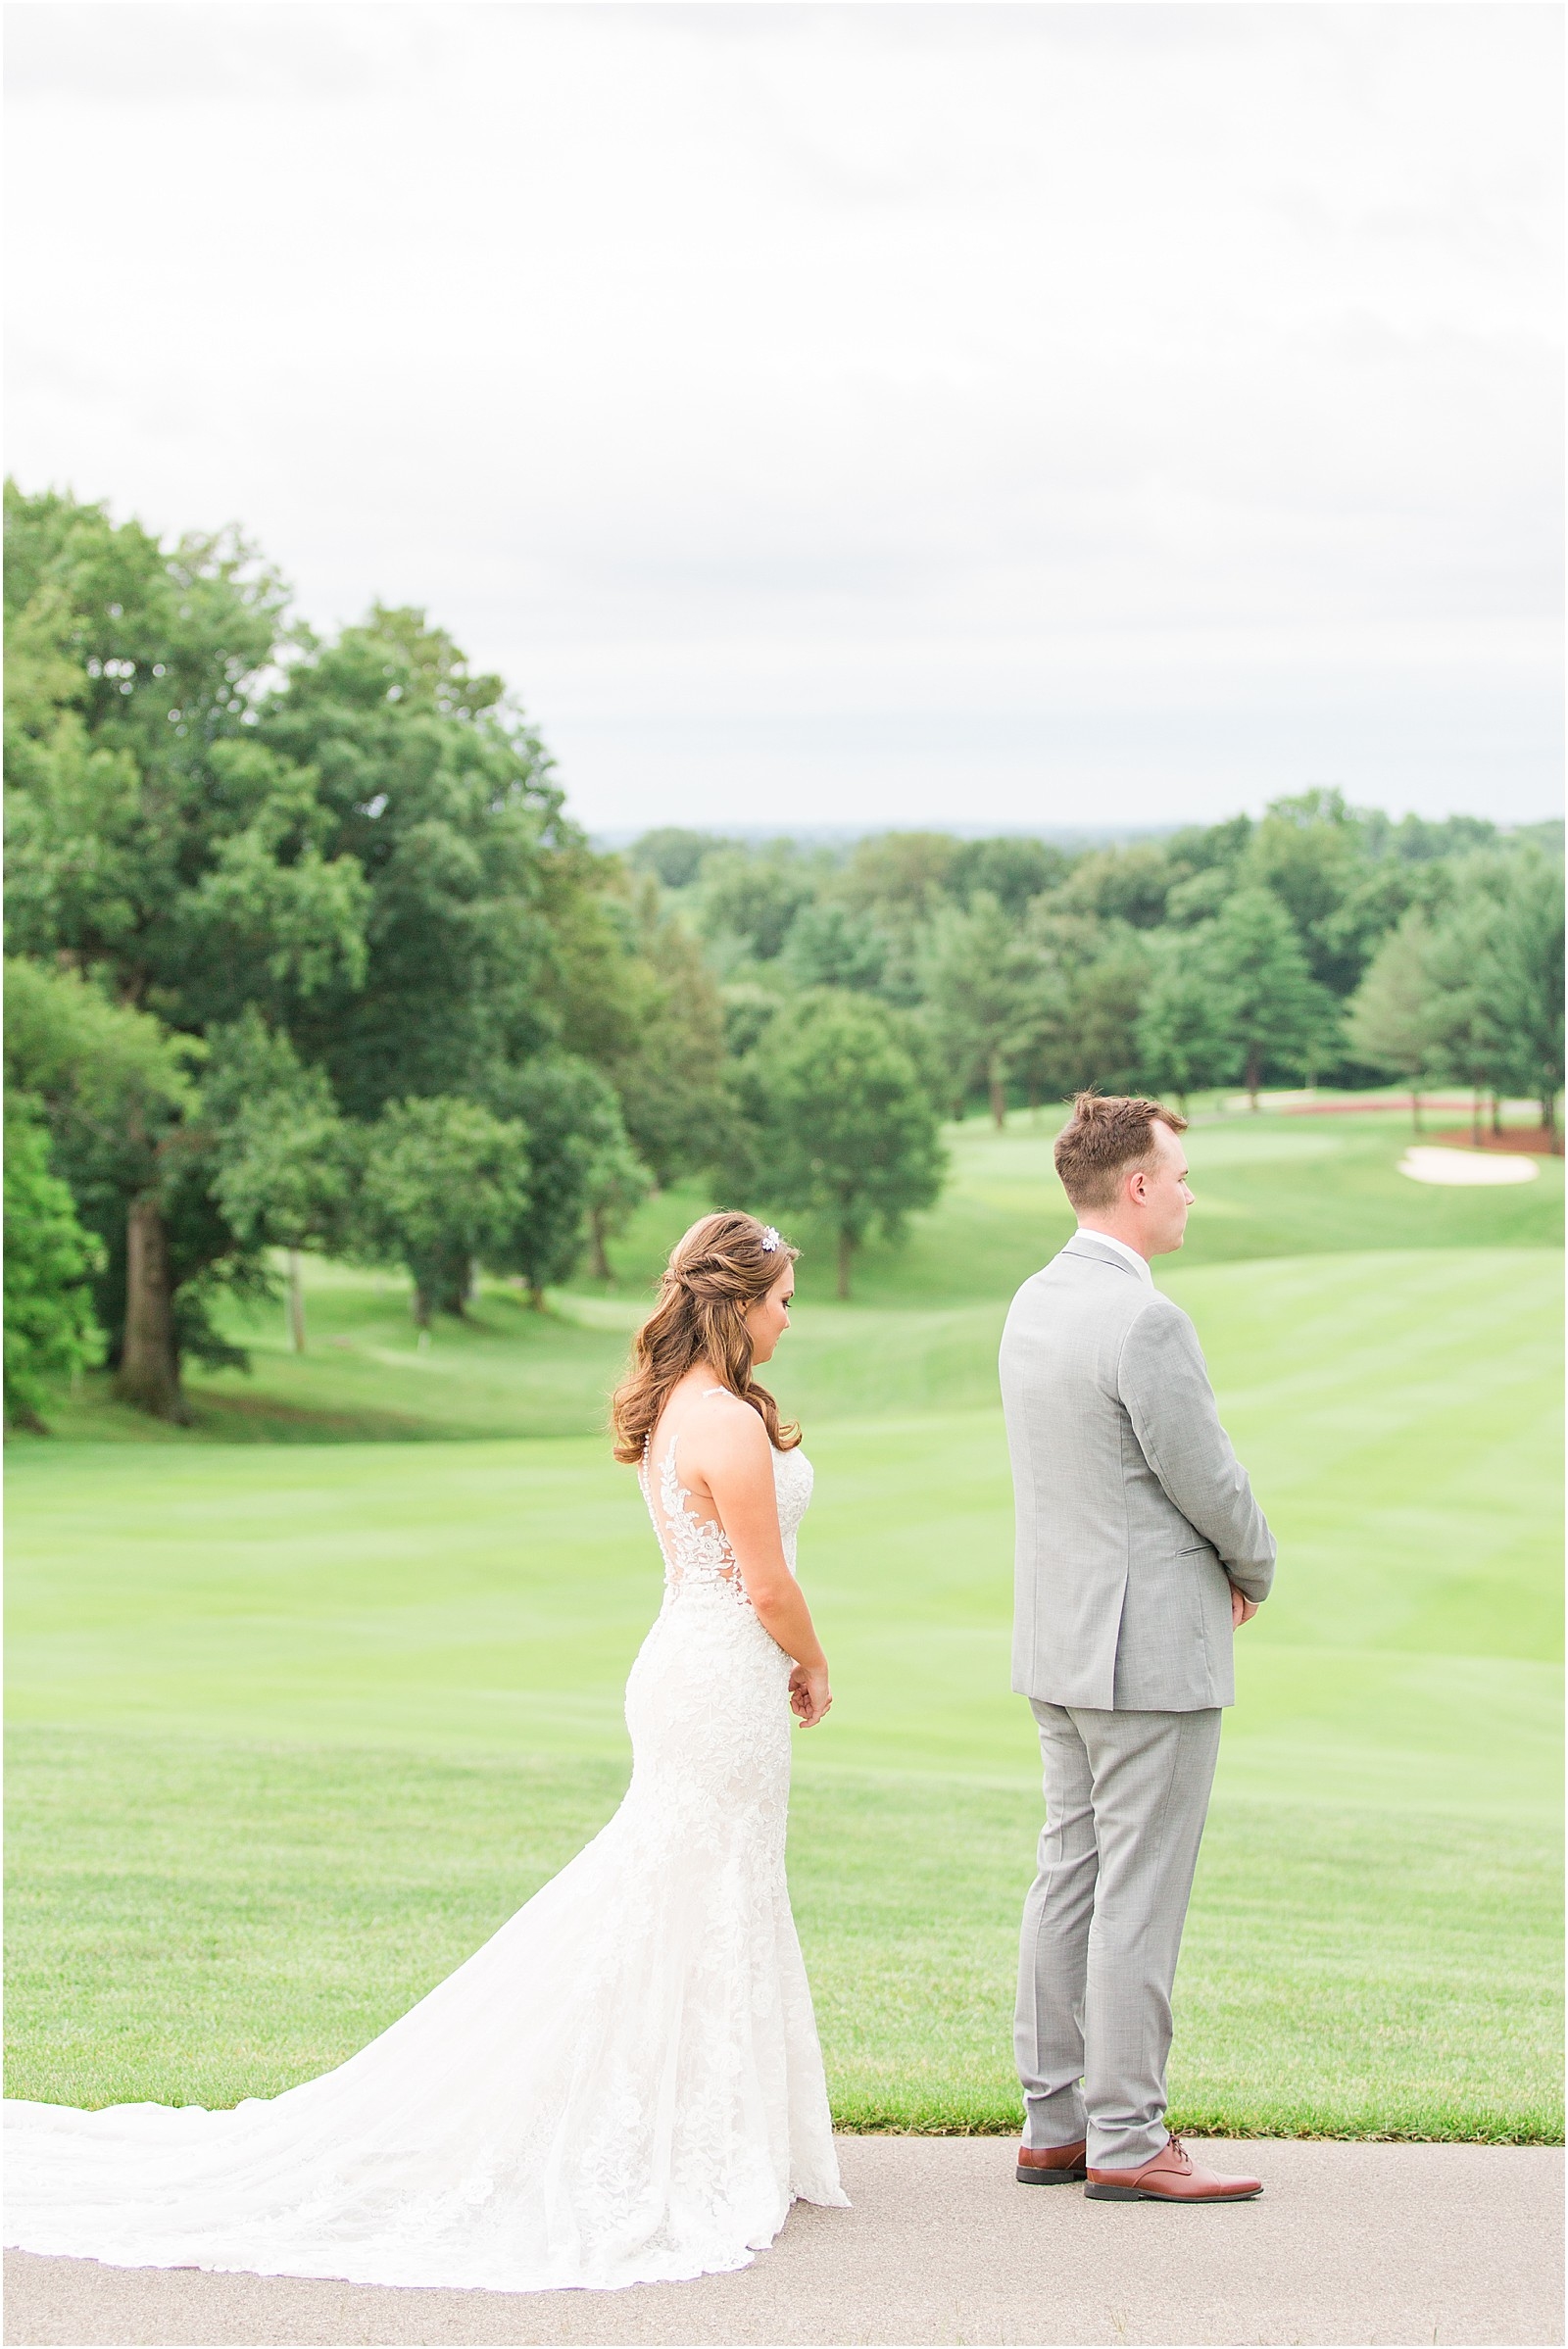 An Evansville County Club Wedding | Abby and Stratton 044.jpg